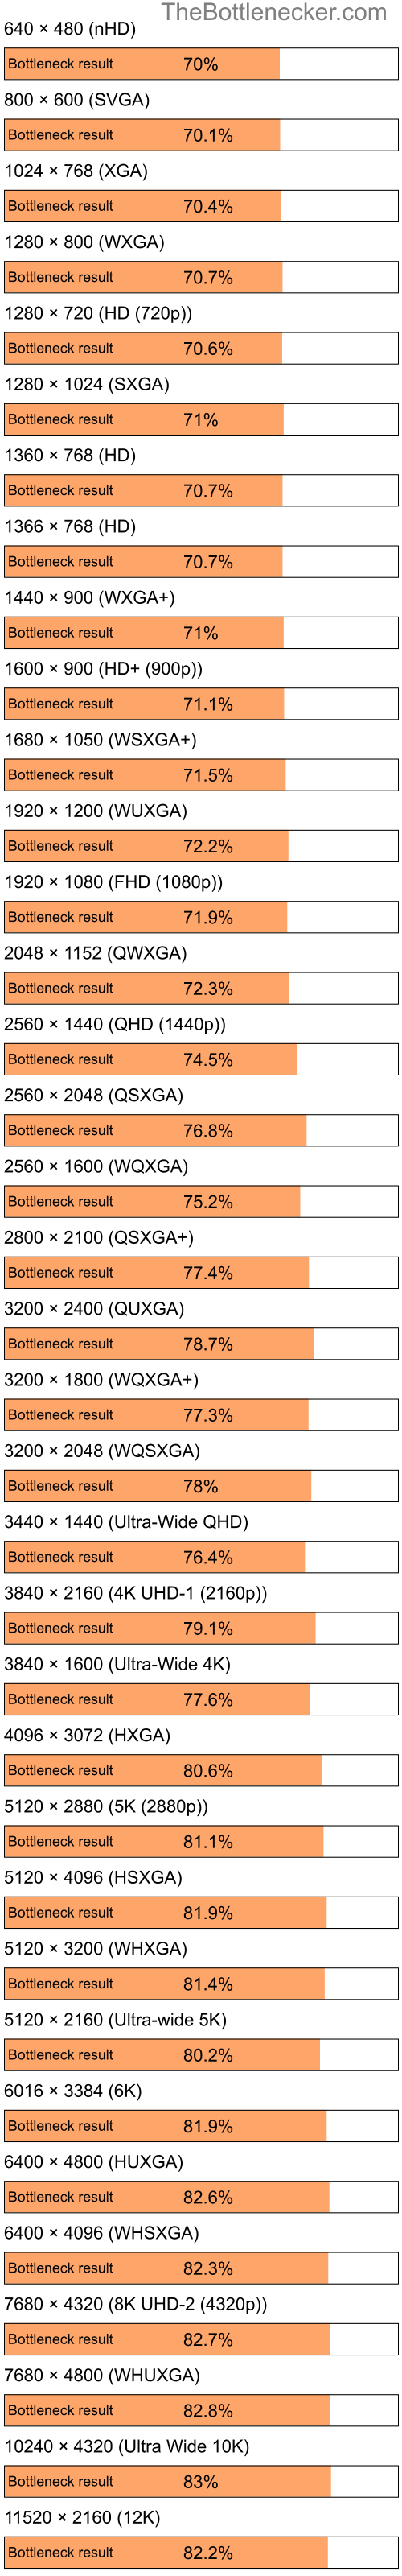 Bottleneck results by resolution for Intel Pentium 4 and AMD Mobility Radeon HD 3470 in Graphic Card Intense Tasks